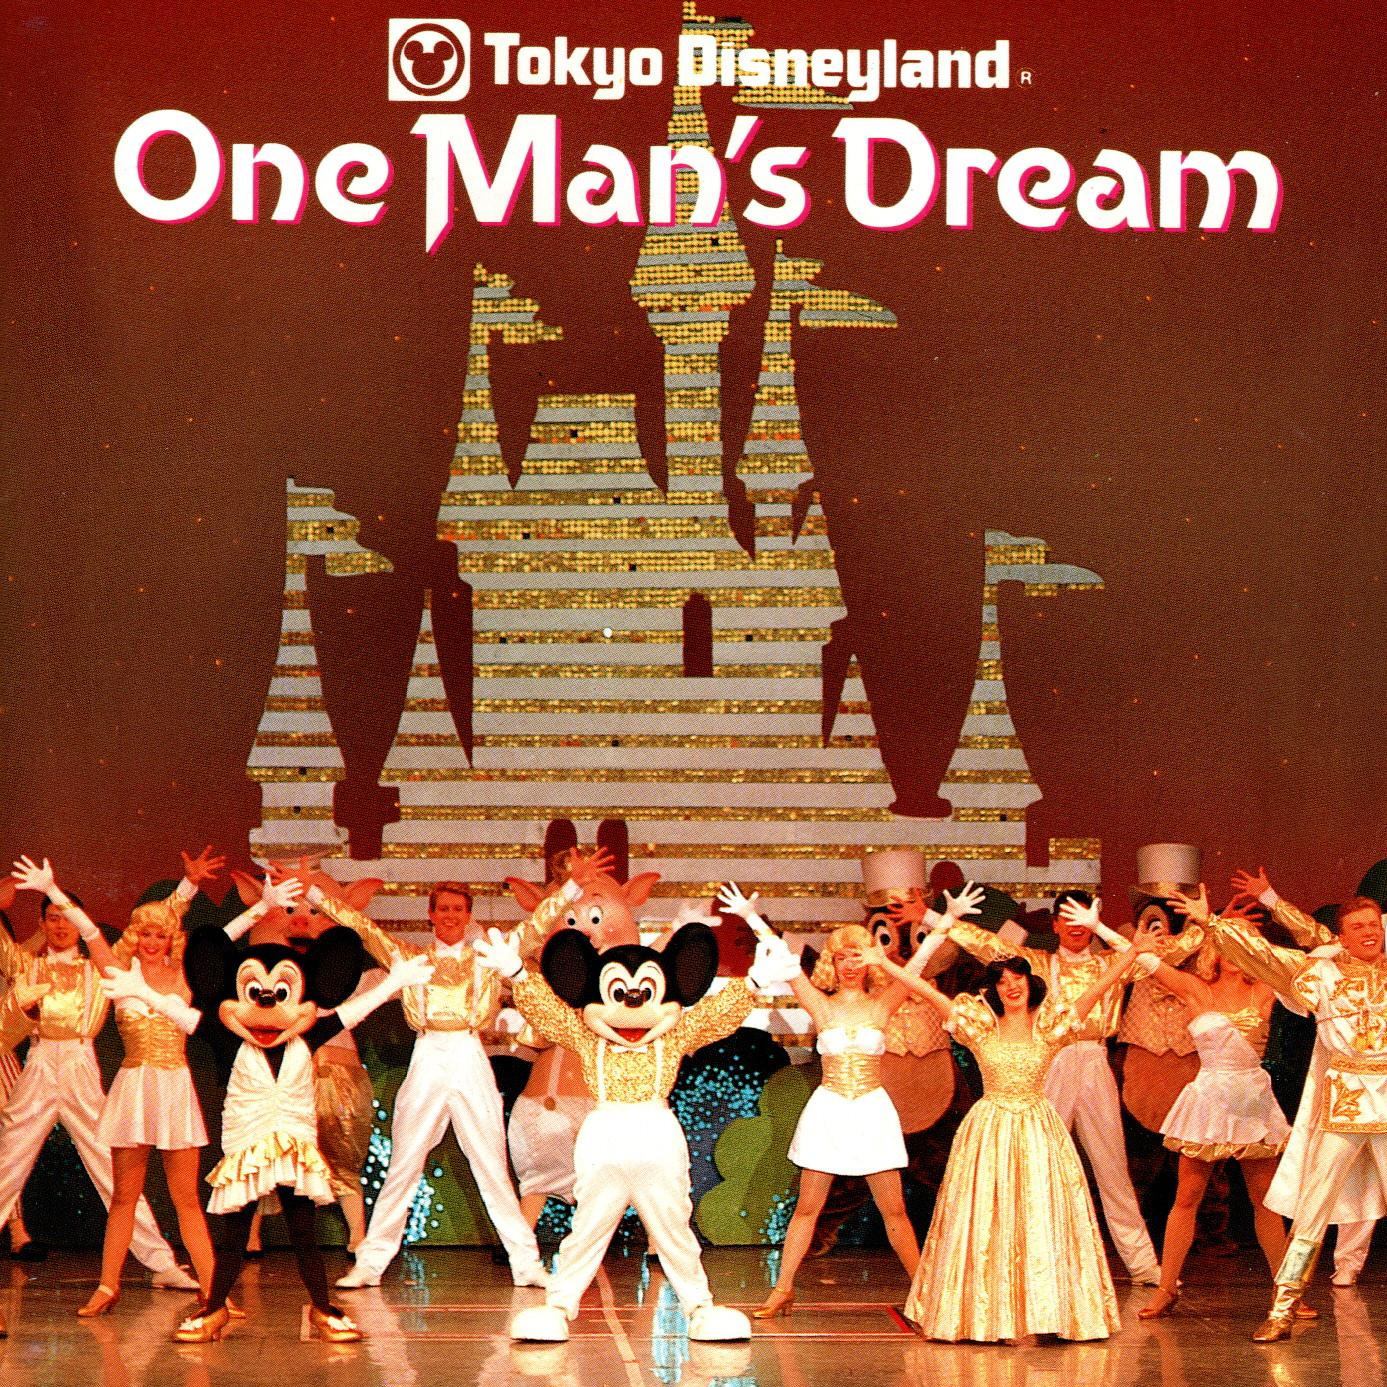 Art for Prince And Princess - One Man's Dream/Someday My Prince Will Come/Once Upon A Dream/So This Is Love by Ricci, Healey, Morey, Churchill, Fain, Lawrence, David, Hoffman & Livingston